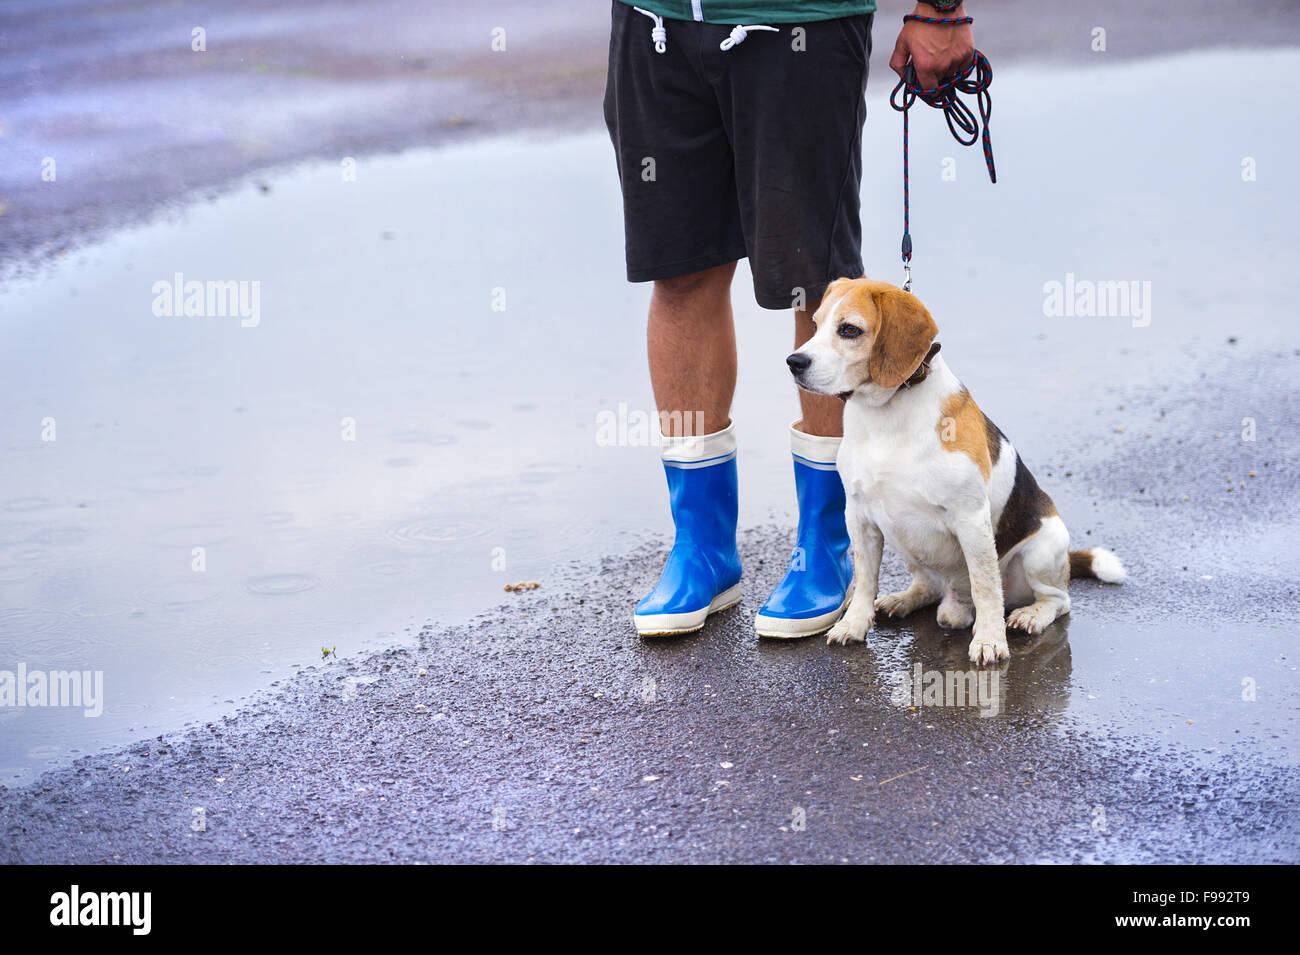 Young man walking dog in rain. Details of legs wellies Stock Photo